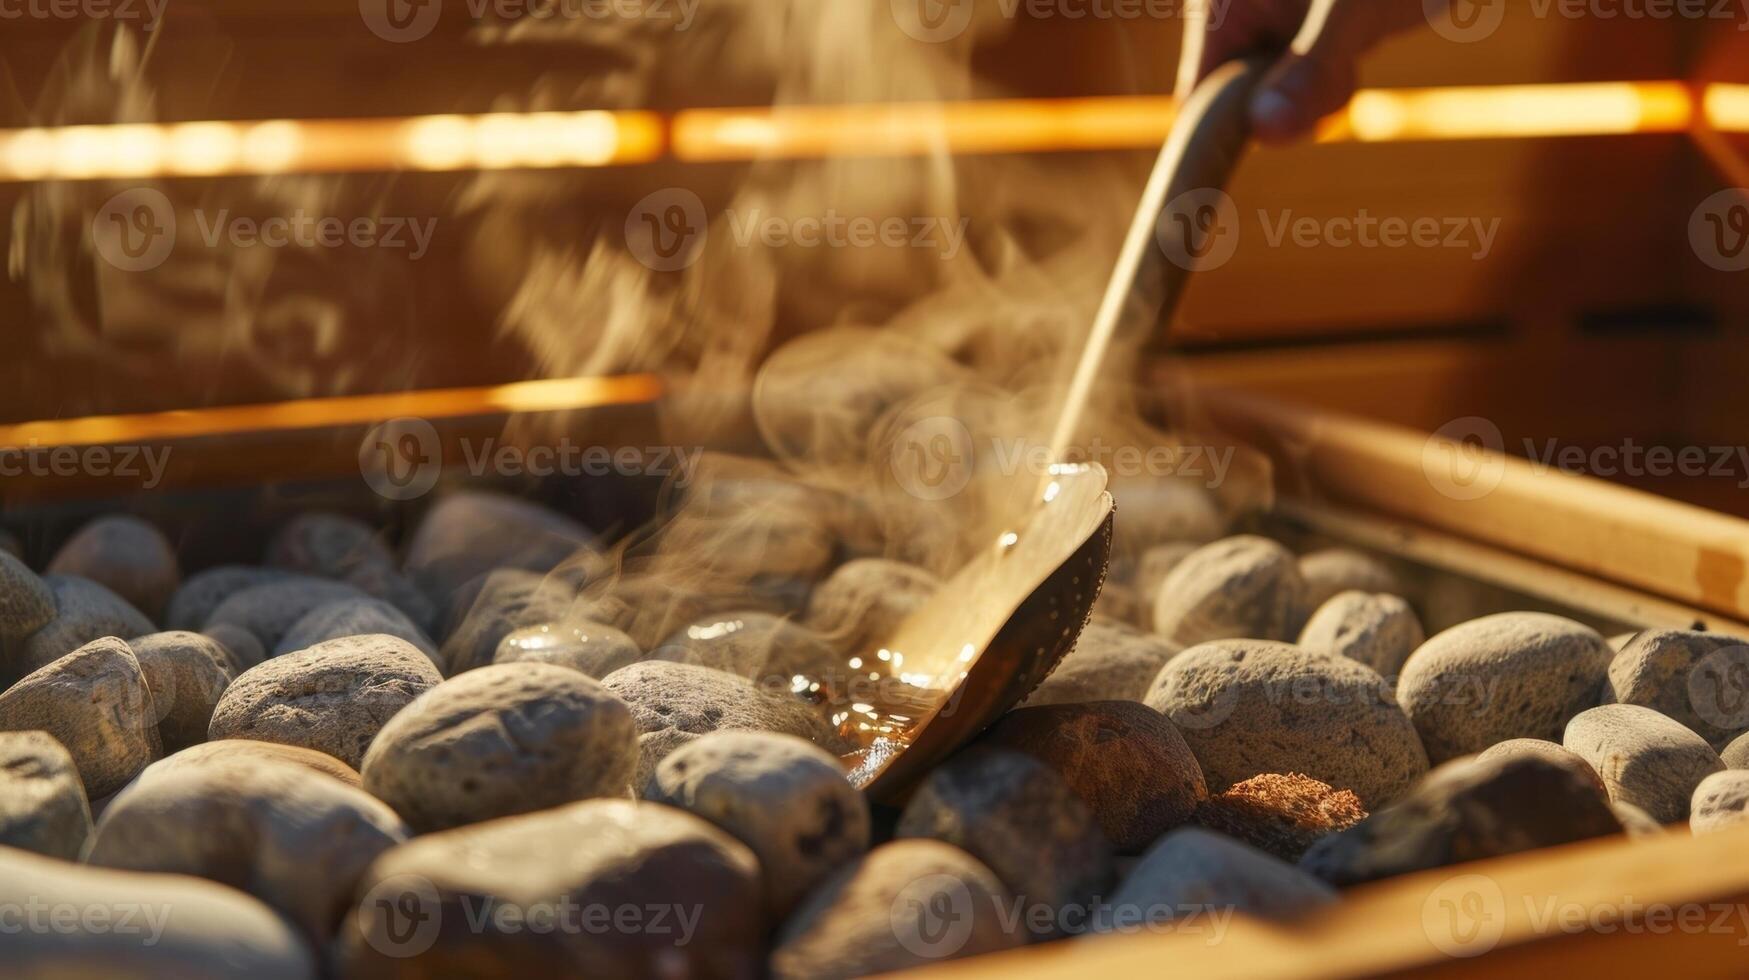 A depiction of someone using a sauna shovel to carefully add water to the sauna rocks and create steam always being cautious of the hot surfaces. photo